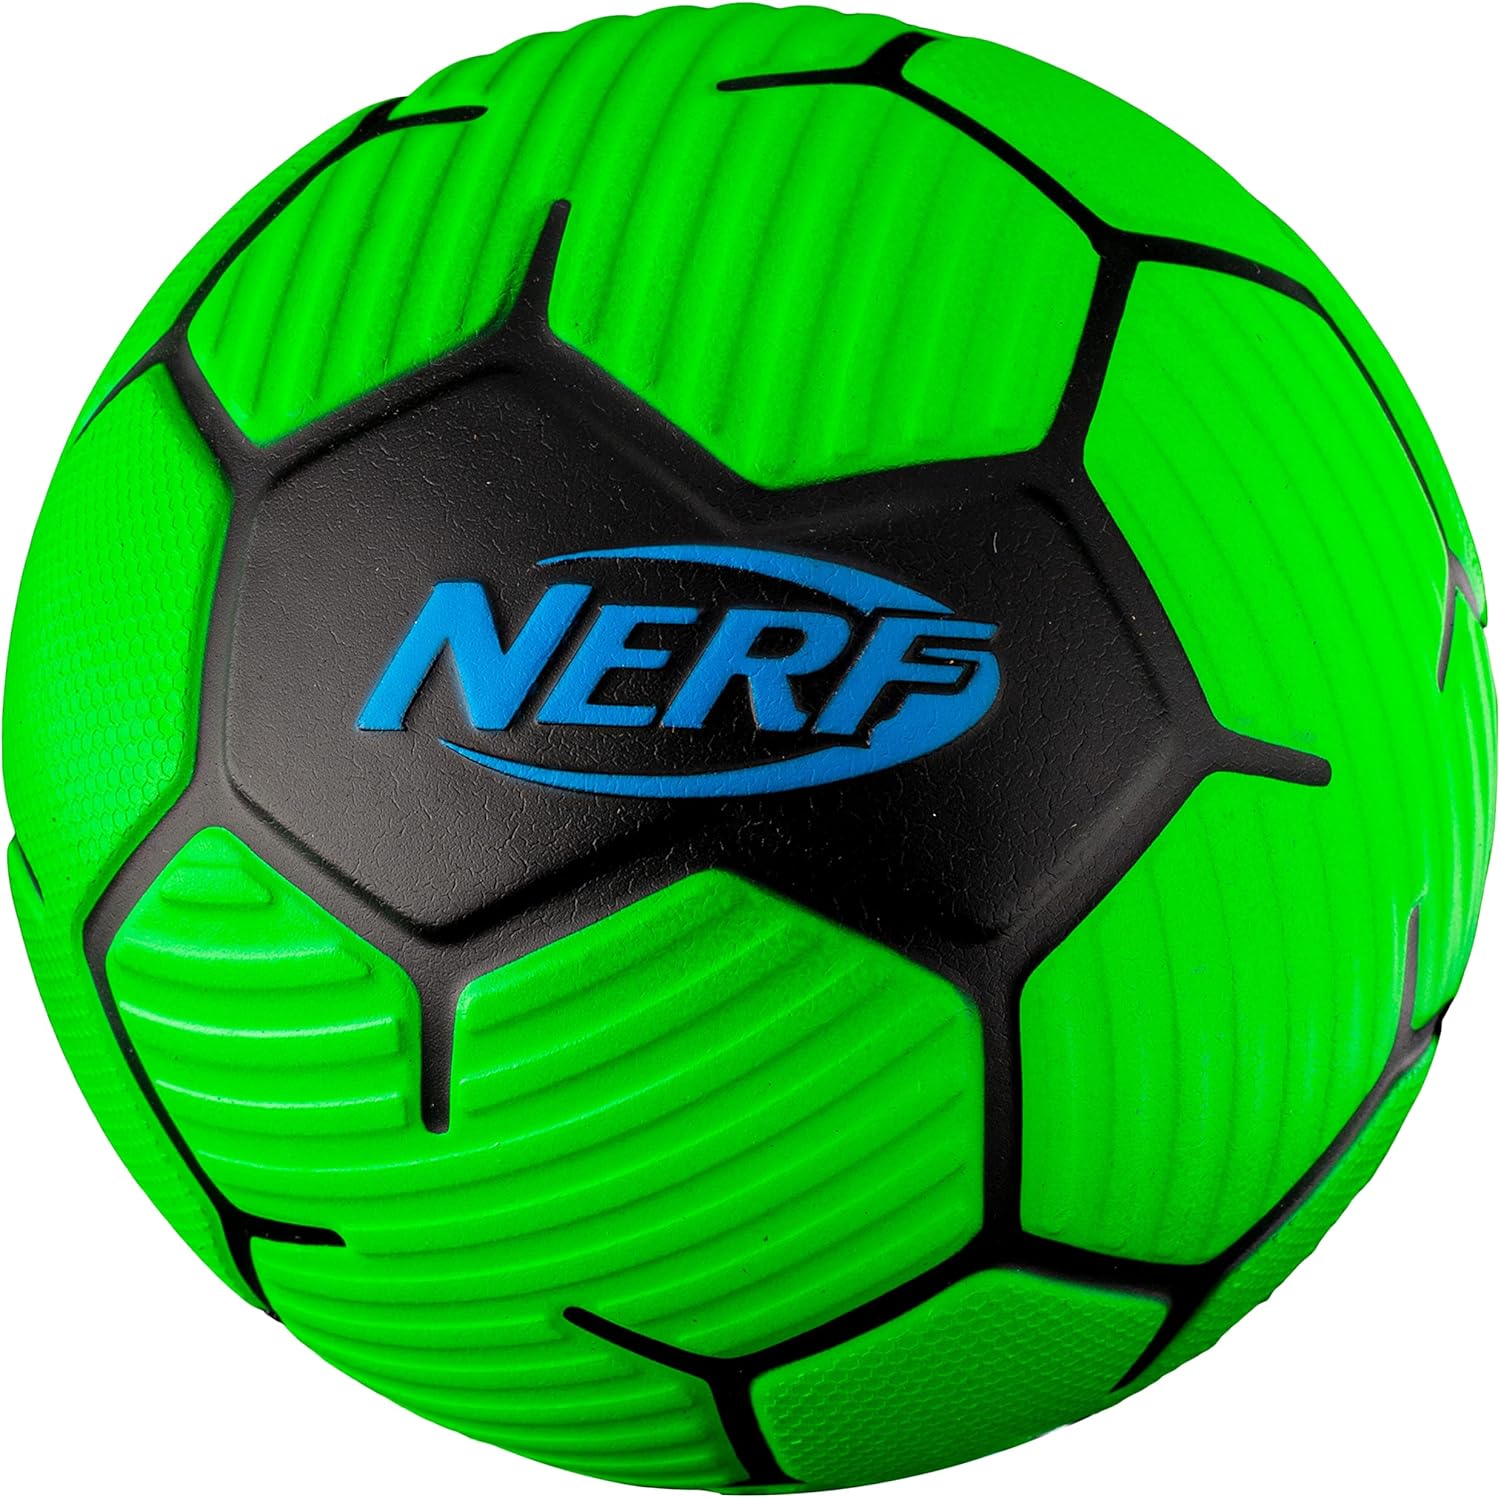 The Nerf Kids Mini Soccer Ball offers a compact and versatile option for indoor and outdoor play. Its smaller size makes it ideal for young players or those looking for a fun and fast-paced game in limited spaces. The soft, foam construction ensures a safe experience while still providing a satisfying bounce and kick. The vibrant colors and Nerf branding add a playful touch, making it visually appealing for both kids and adults. Whether youre honing your soccer skills or just looking for a casu